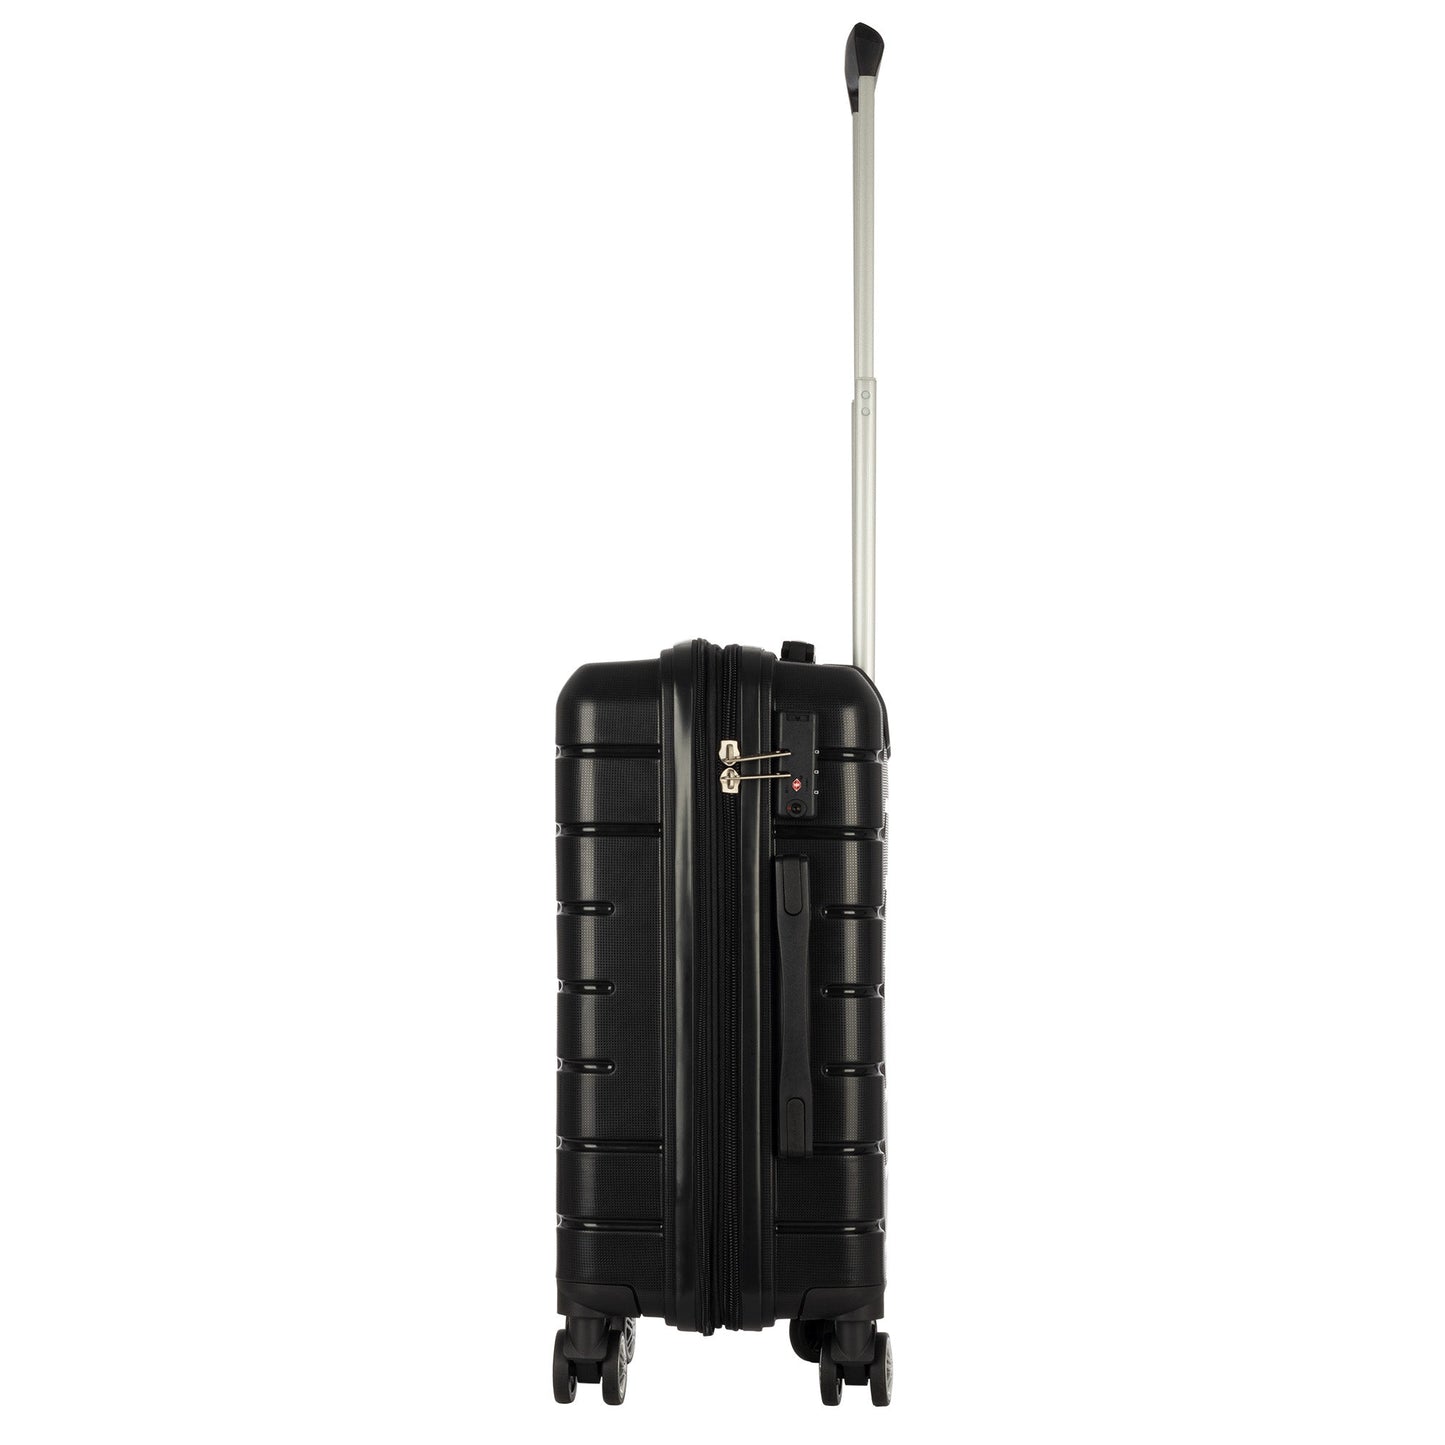 Ian collection luggage black (20") Suitcase Lock Spinner